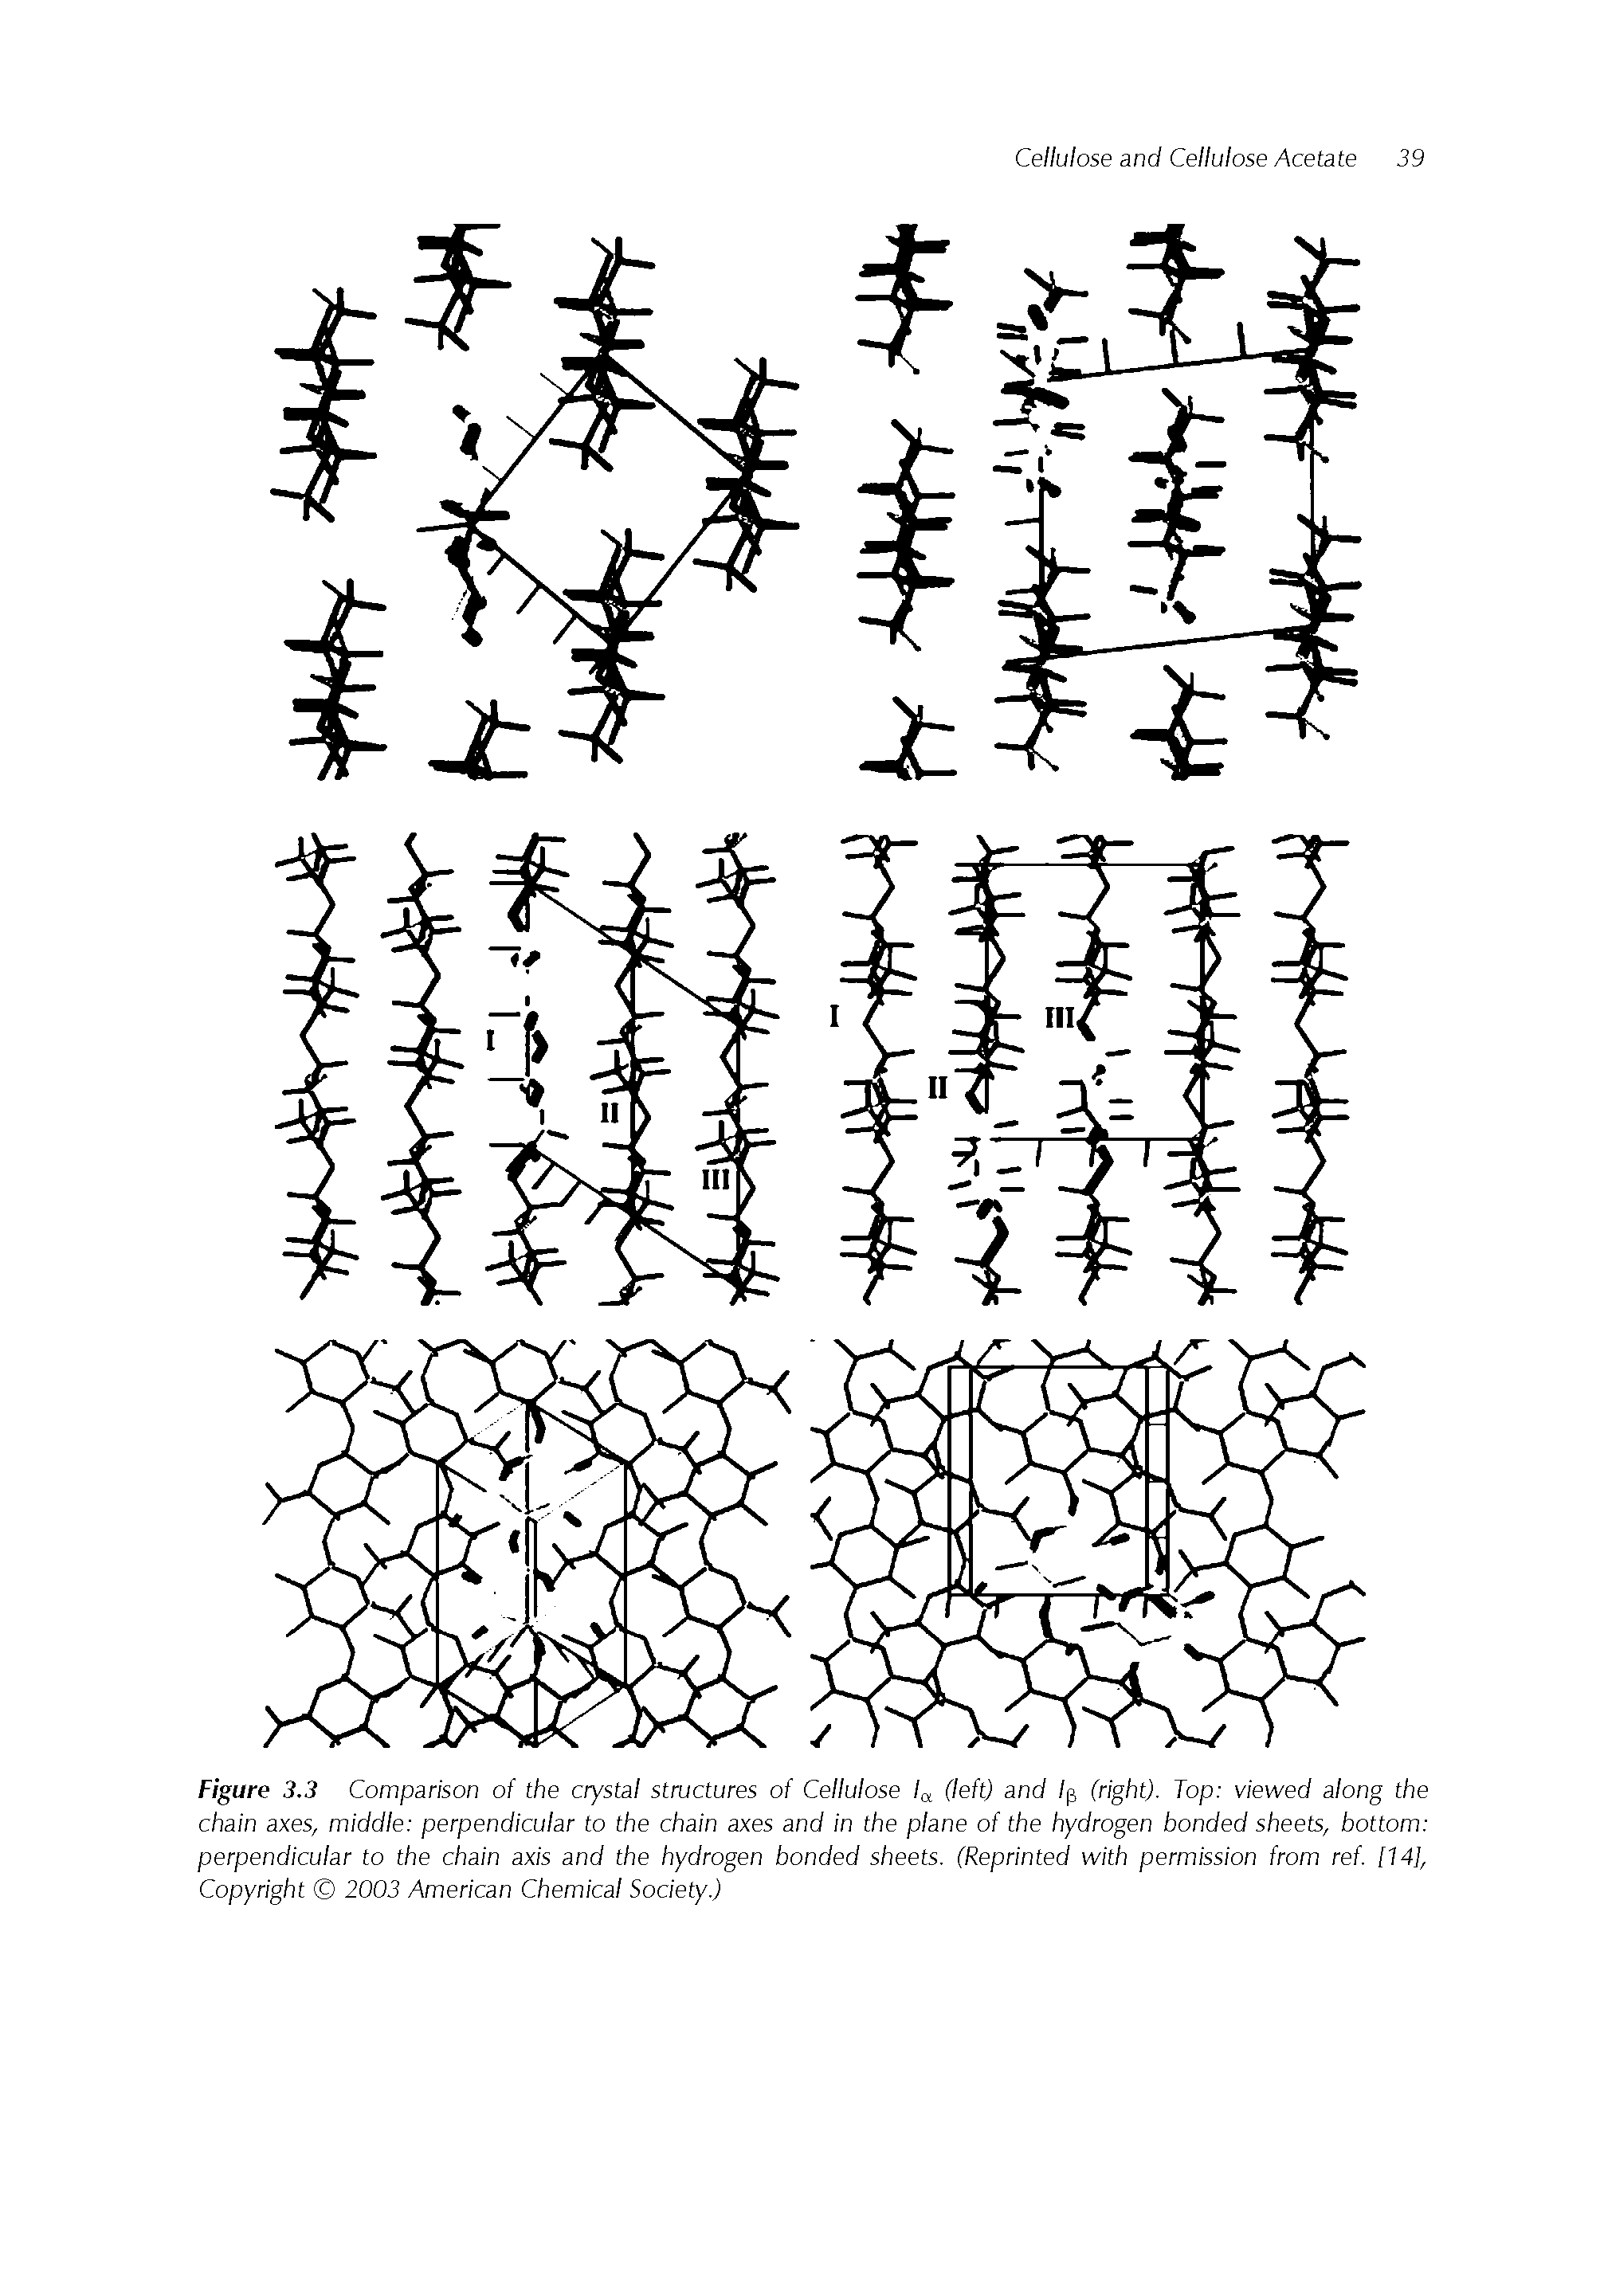 Figure 3.3 Comparison of the crystal structures of Cellulose / (left) and /p (right). Top viewed along the chain axes, middle perpendicular to the chain axes and in the plane of the hydrogen bonded sheets, bottom perpendicular to the chain axis and the hydrogen bonded sheets. (Reprinted with permission from ref. [14], Copyright 2003 American Chemical Society.)...